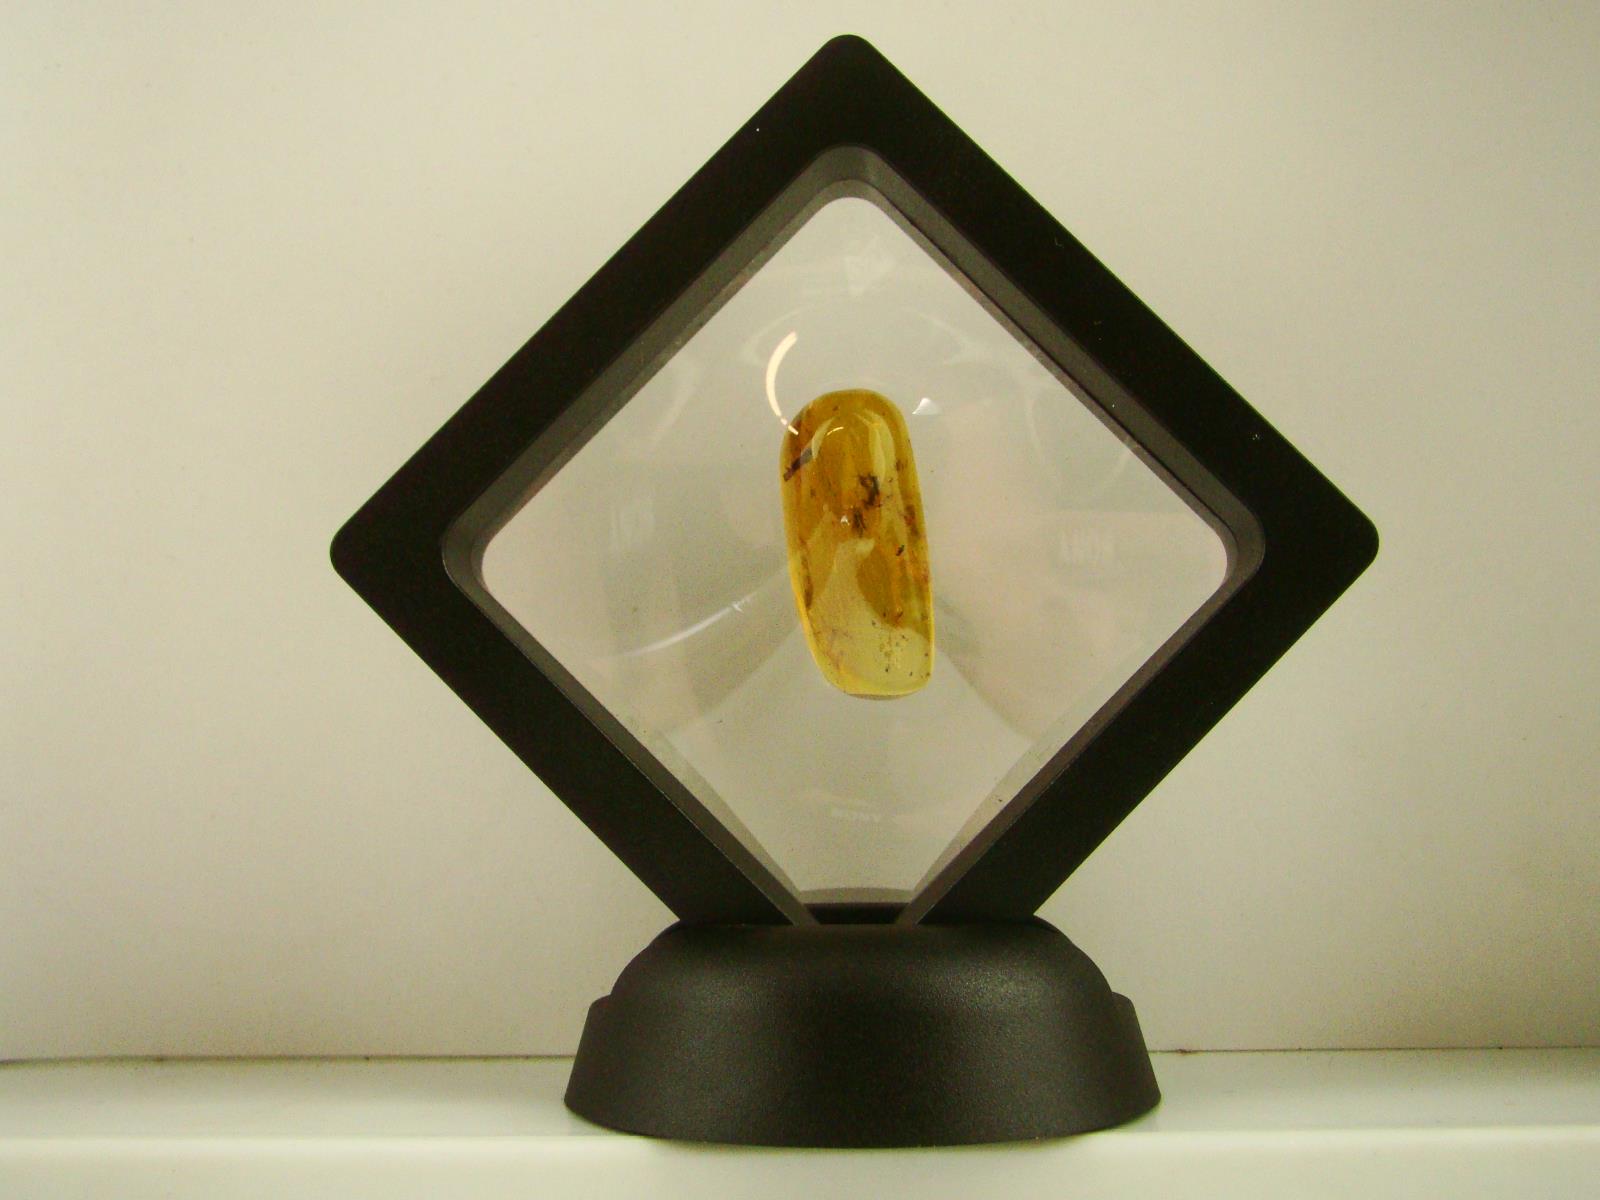 Baltic Amber Fossil with Insect Inside - Specimen in Display Case #A6